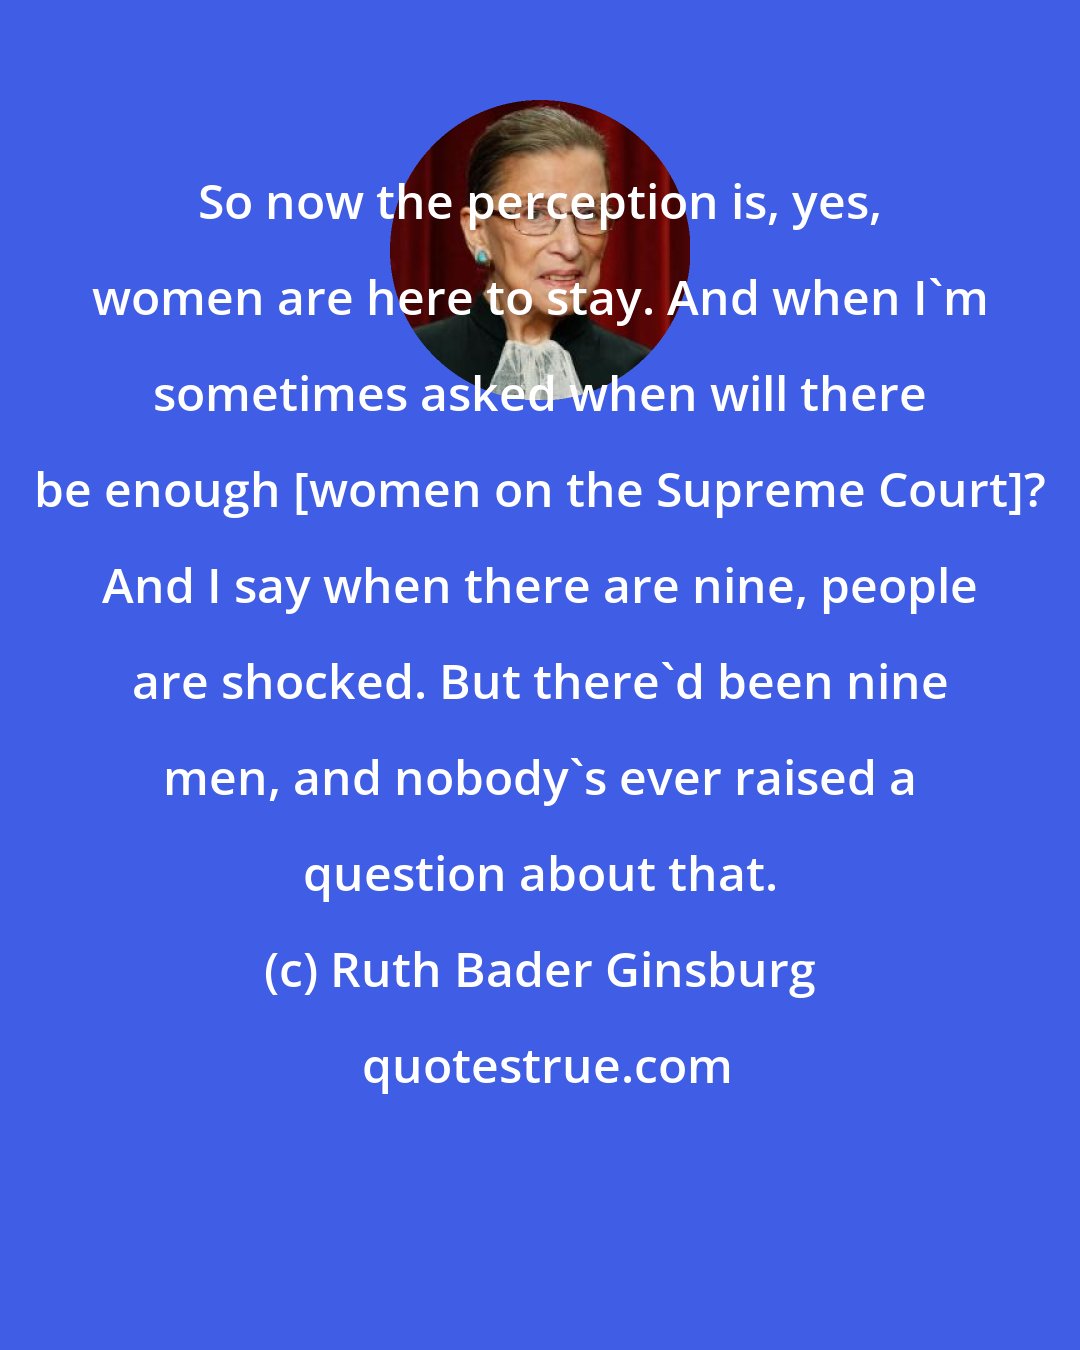 Ruth Bader Ginsburg: So now the perception is, yes, women are here to stay. And when I'm sometimes asked when will there be enough [women on the Supreme Court]? And I say when there are nine, people are shocked. But there'd been nine men, and nobody's ever raised a question about that.